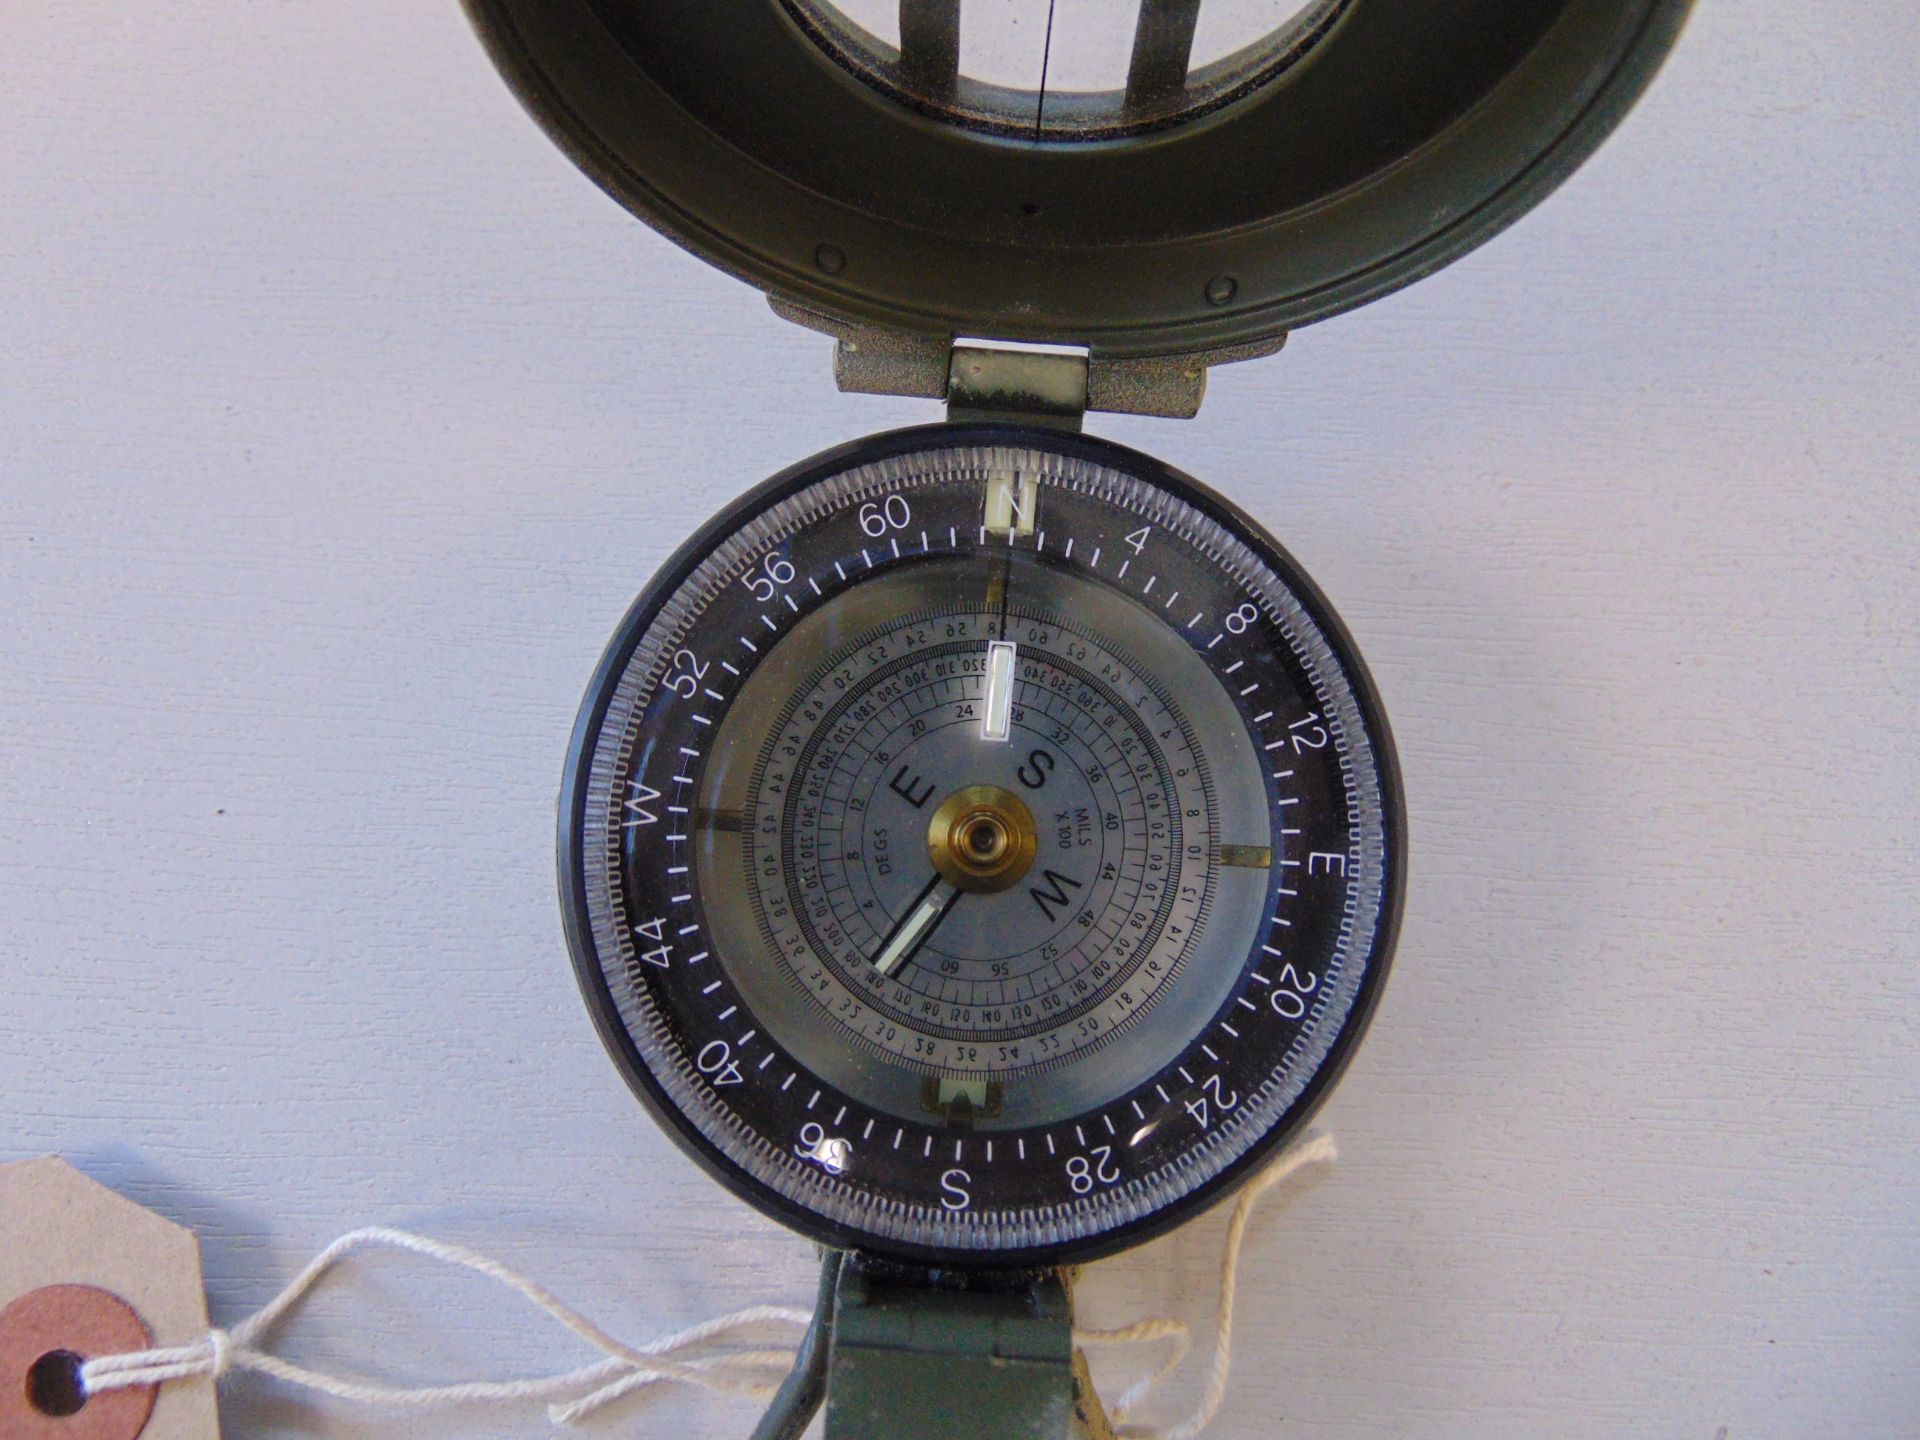 Francis Barker M88 British Army Prismatic Compass in Desert Camo - Image 3 of 4